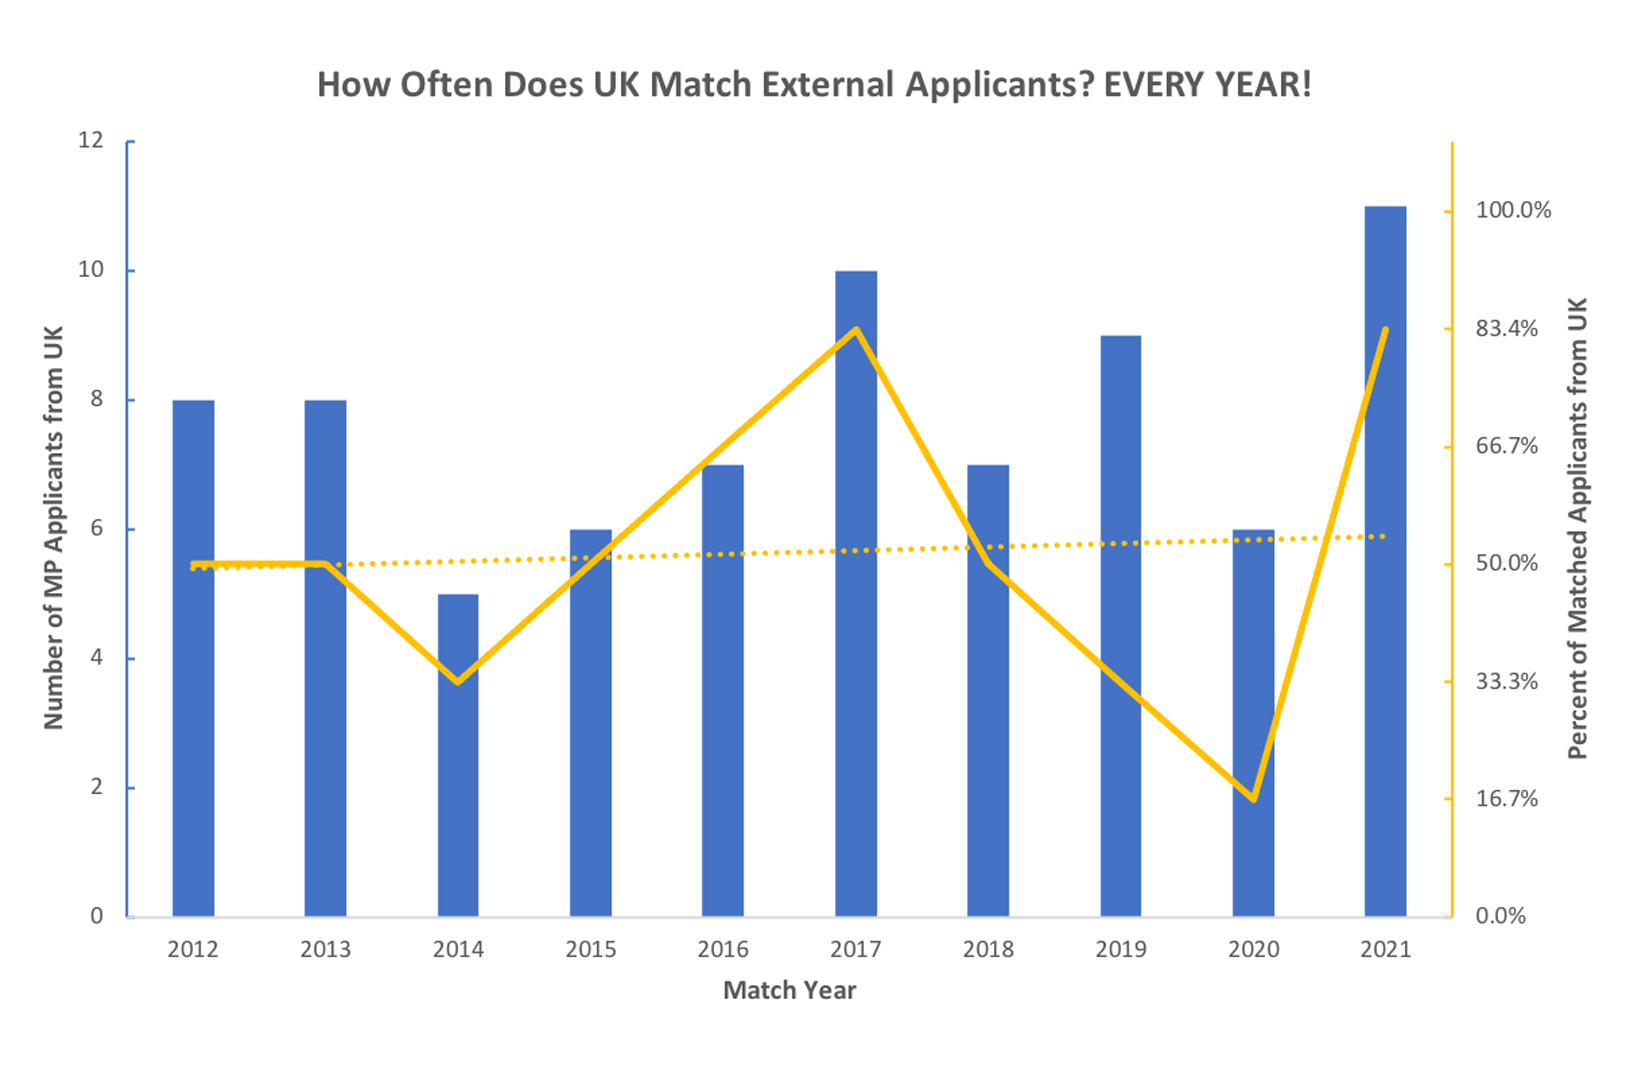 How Often Does UK Match External Applicants? Every Year! Up to 11 applicants have matched with UK since 2012, with an average of 5 matched applicants per year!